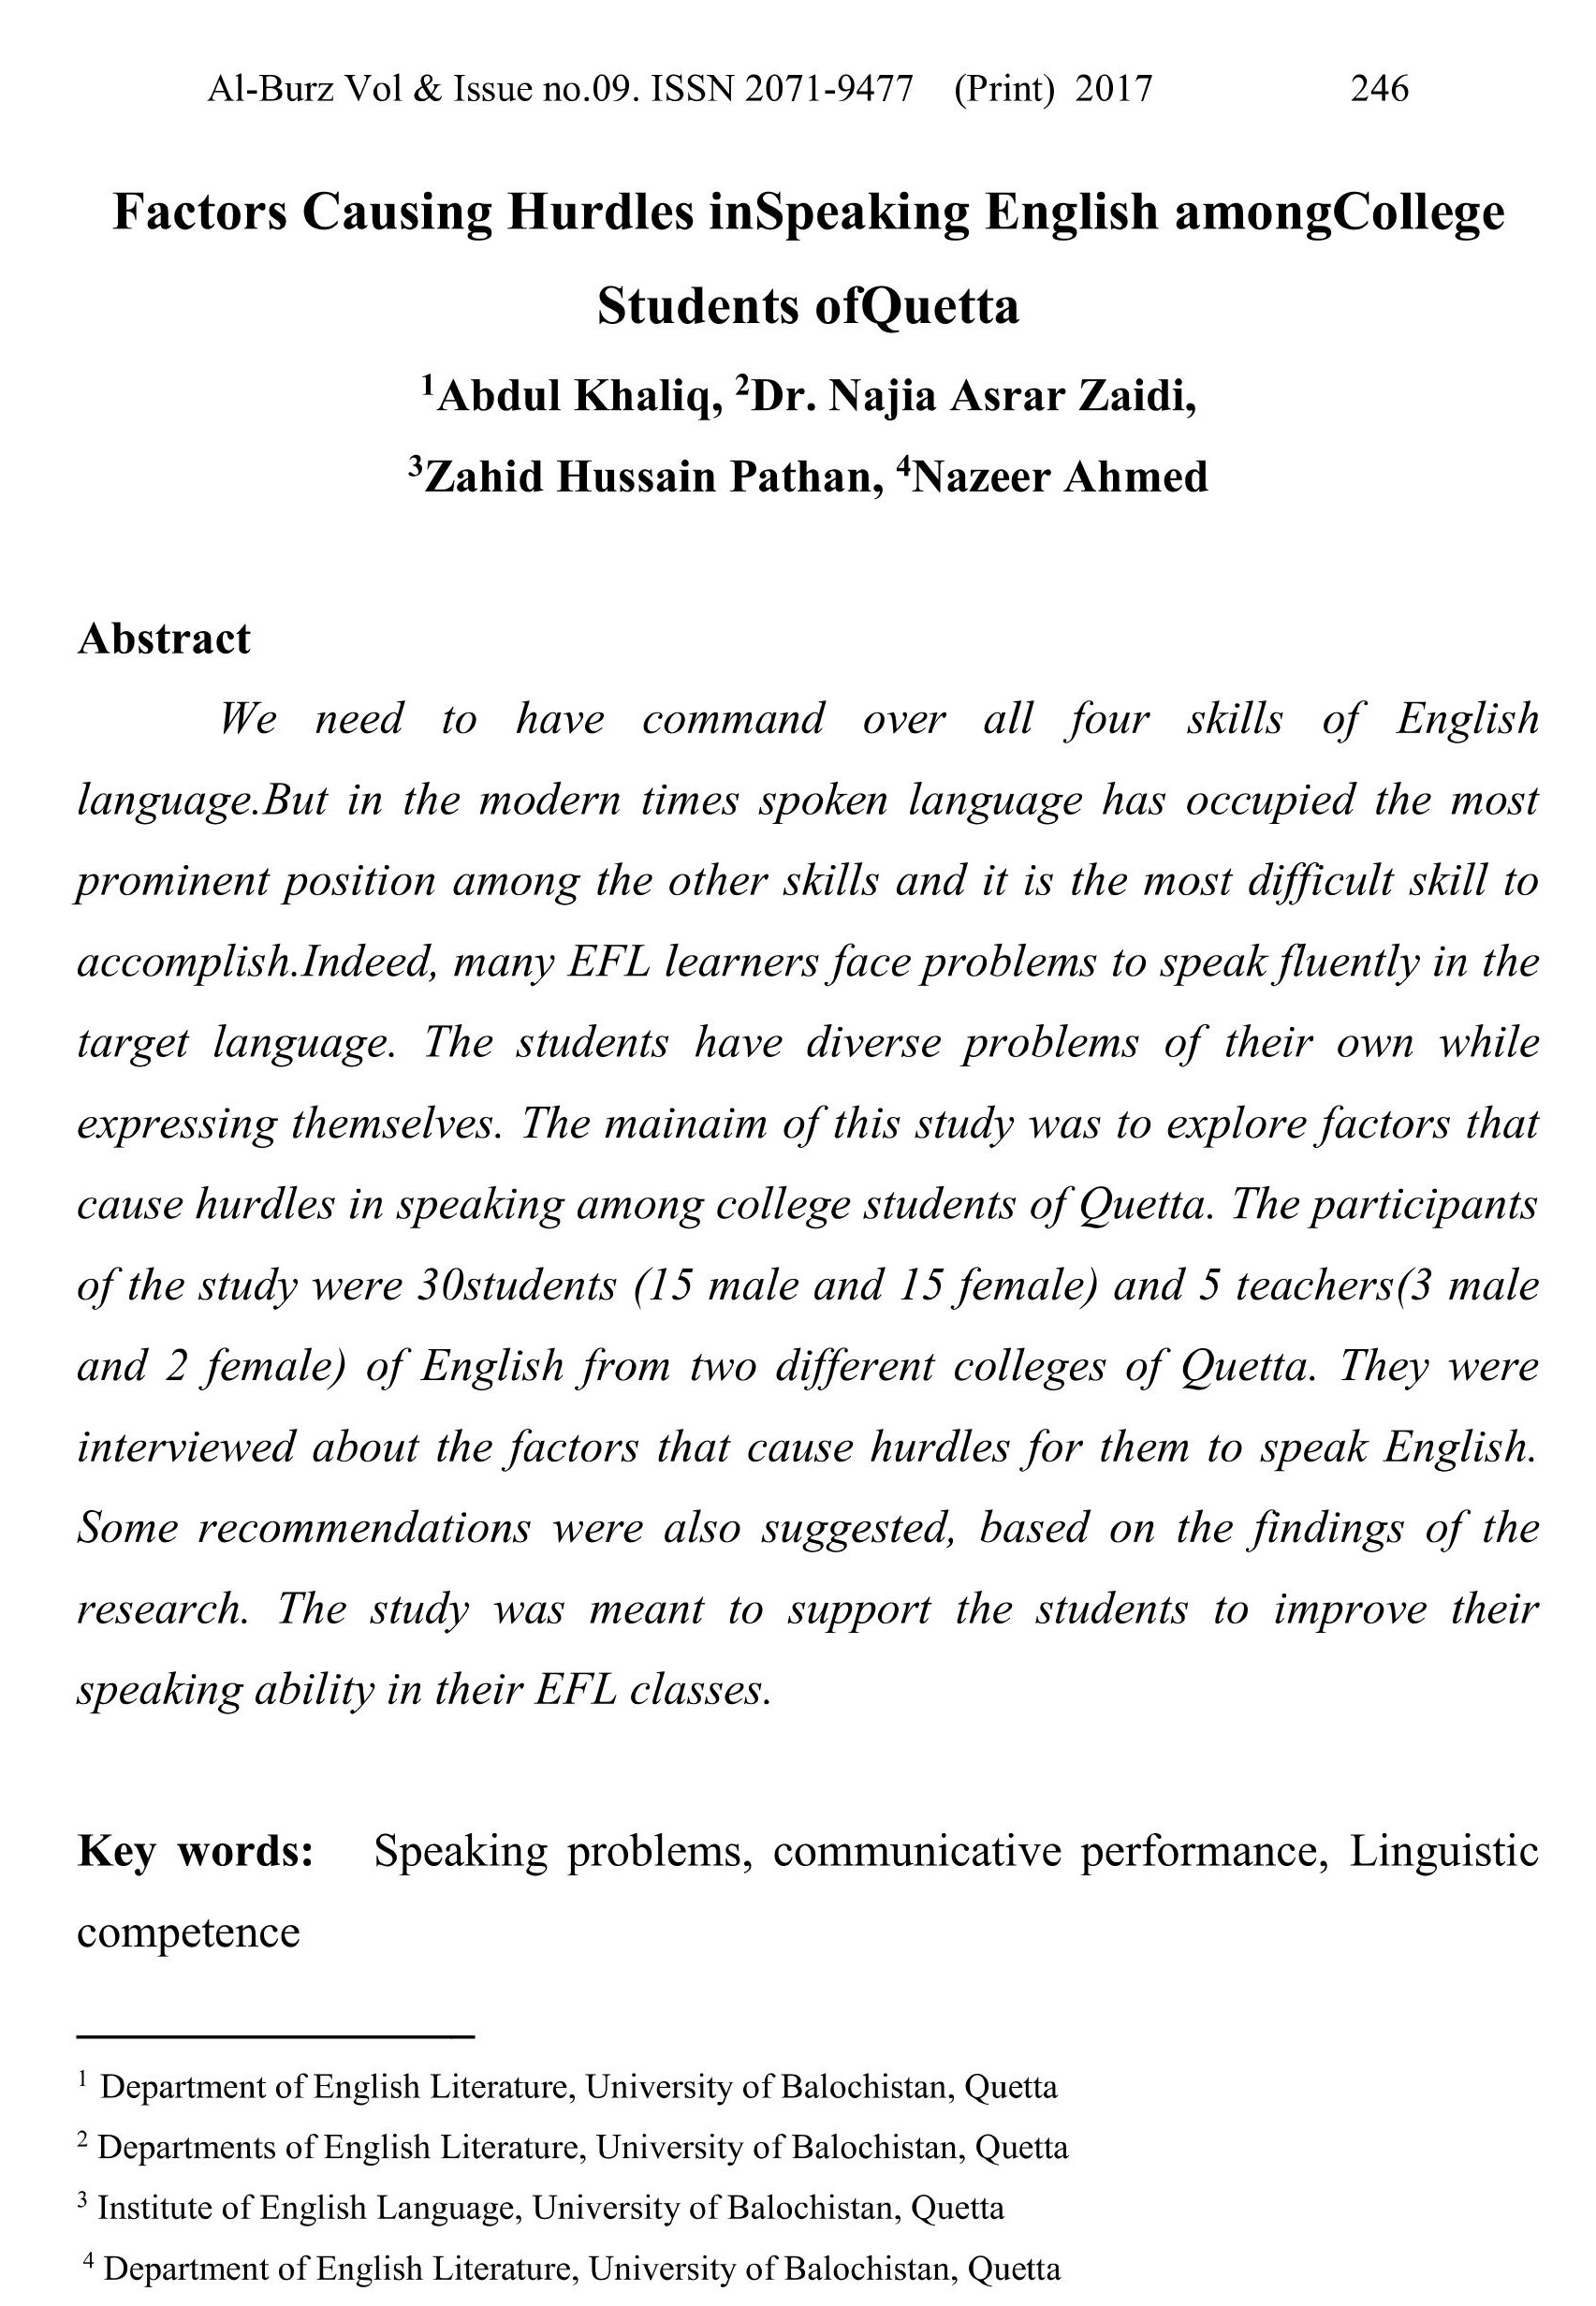 Factors Causing Hurdles in Speaking English among College Students of Quetta